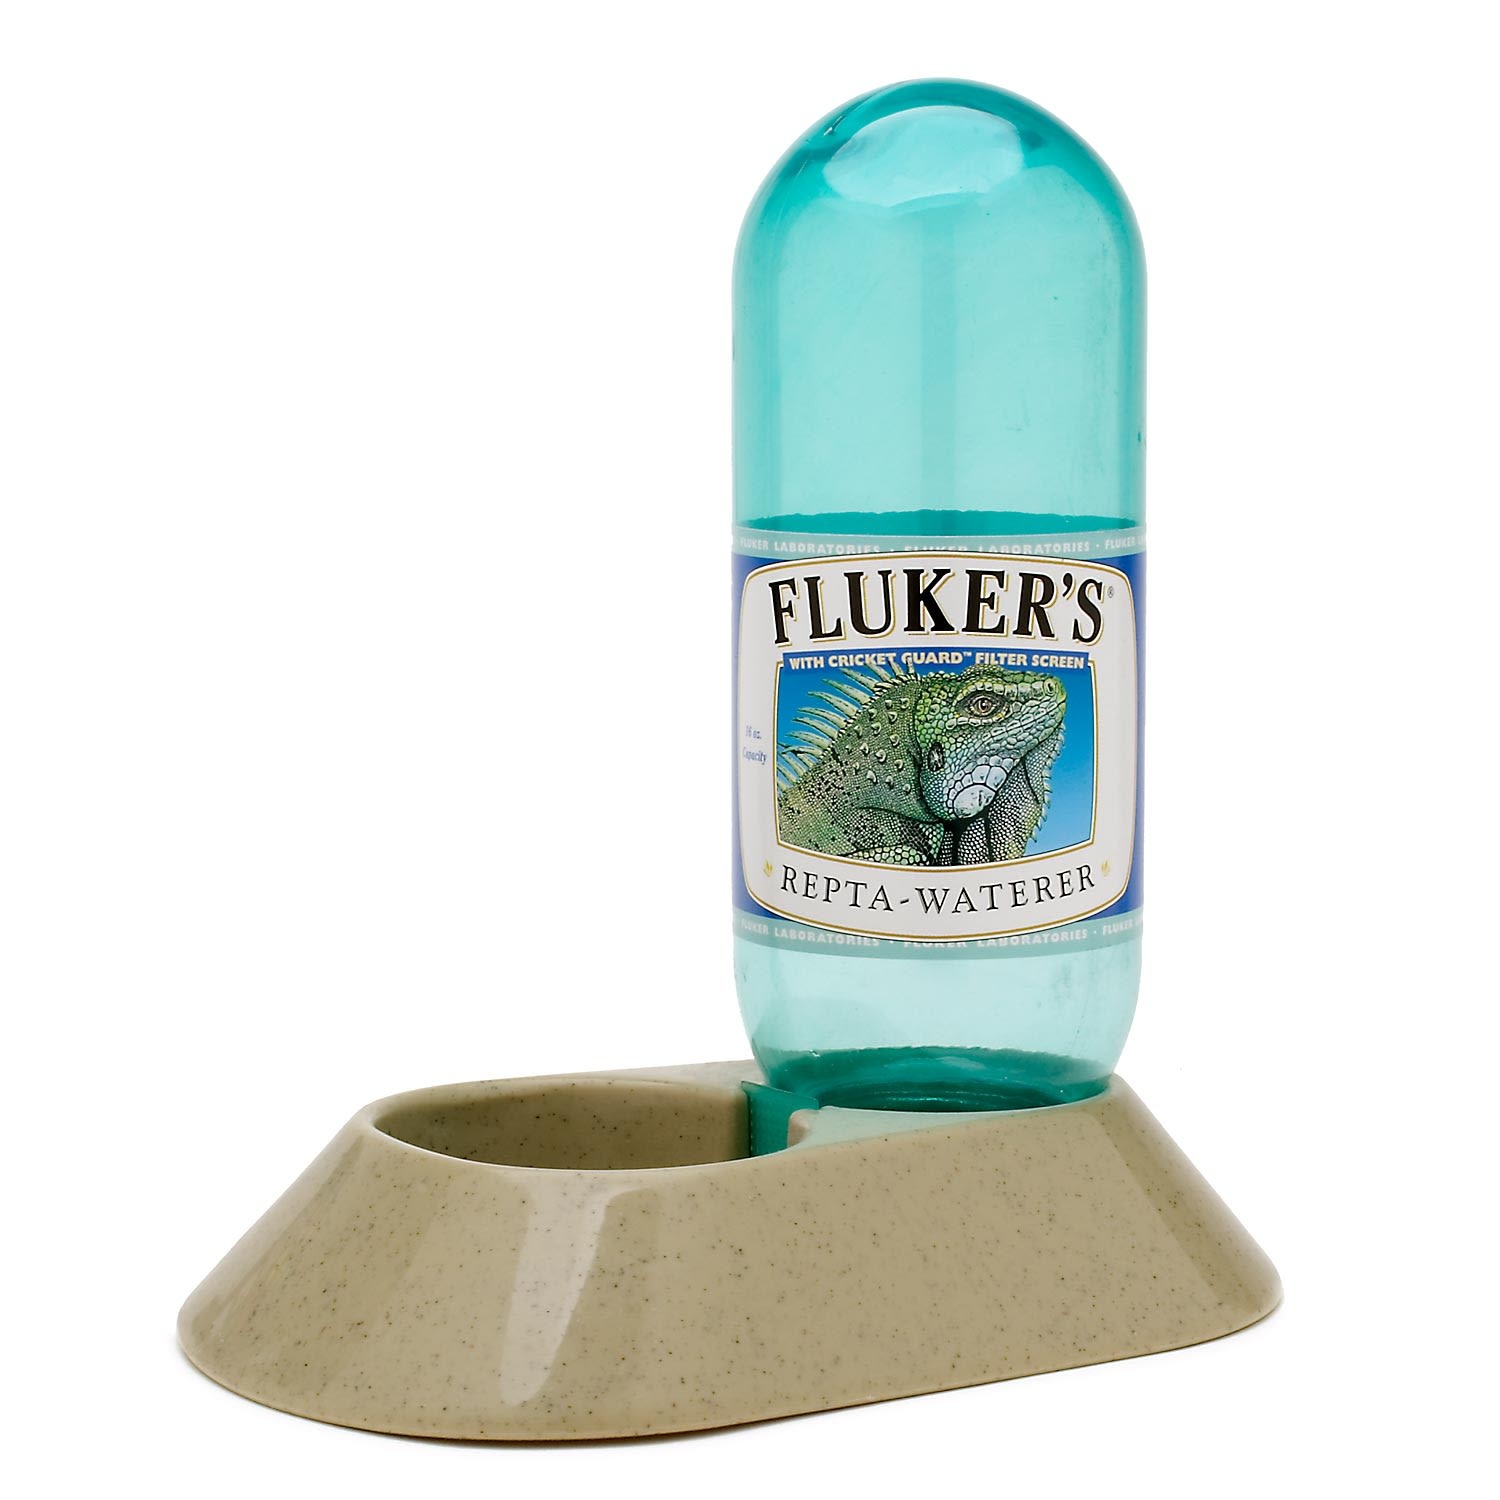 slide 1 of 1, Fluker's Repta-Waterer with Cricket Guard Filter Screen, 1 ct